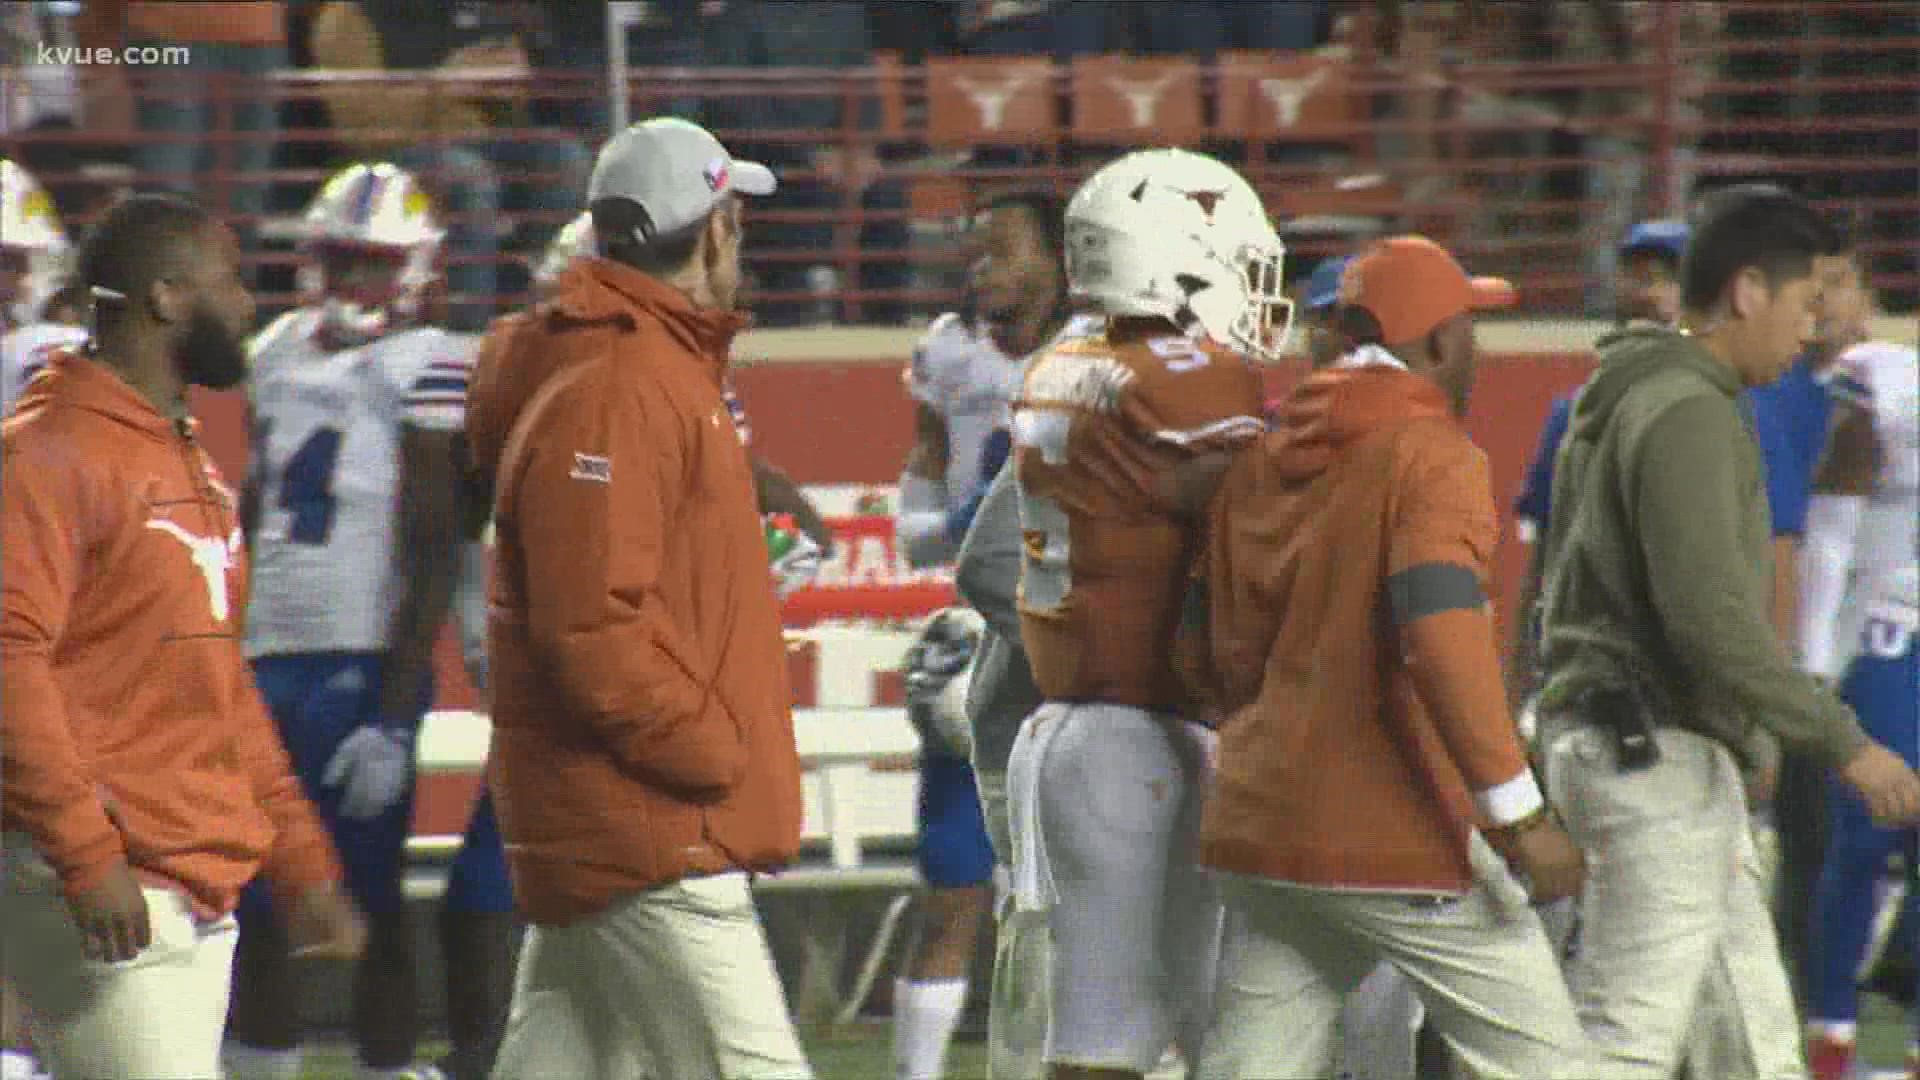 Texas running back Bijan Robinson told reporters Monday he would not be leaving Texas and does not intend to sit out the season to avoid injury.